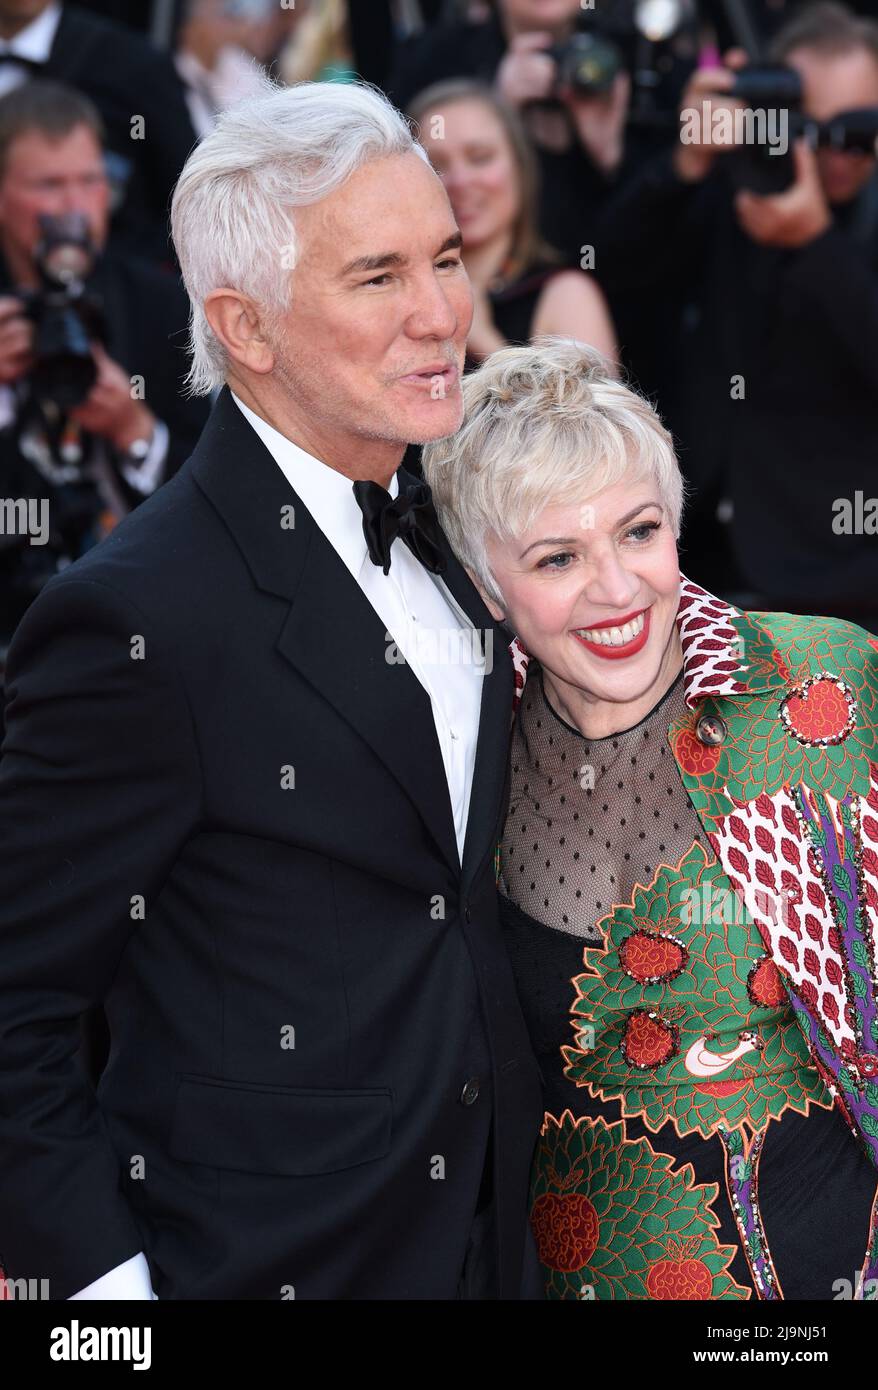 Cannes, France. 24th May, 2022. May 24th, 2022. Cannes, France. Baz  Luhrmann and Catherine Martin attending The Innocent Premiere, part of the  75th Cannes Film Festival, Palais de Festival, Cannes. Credit: Doug